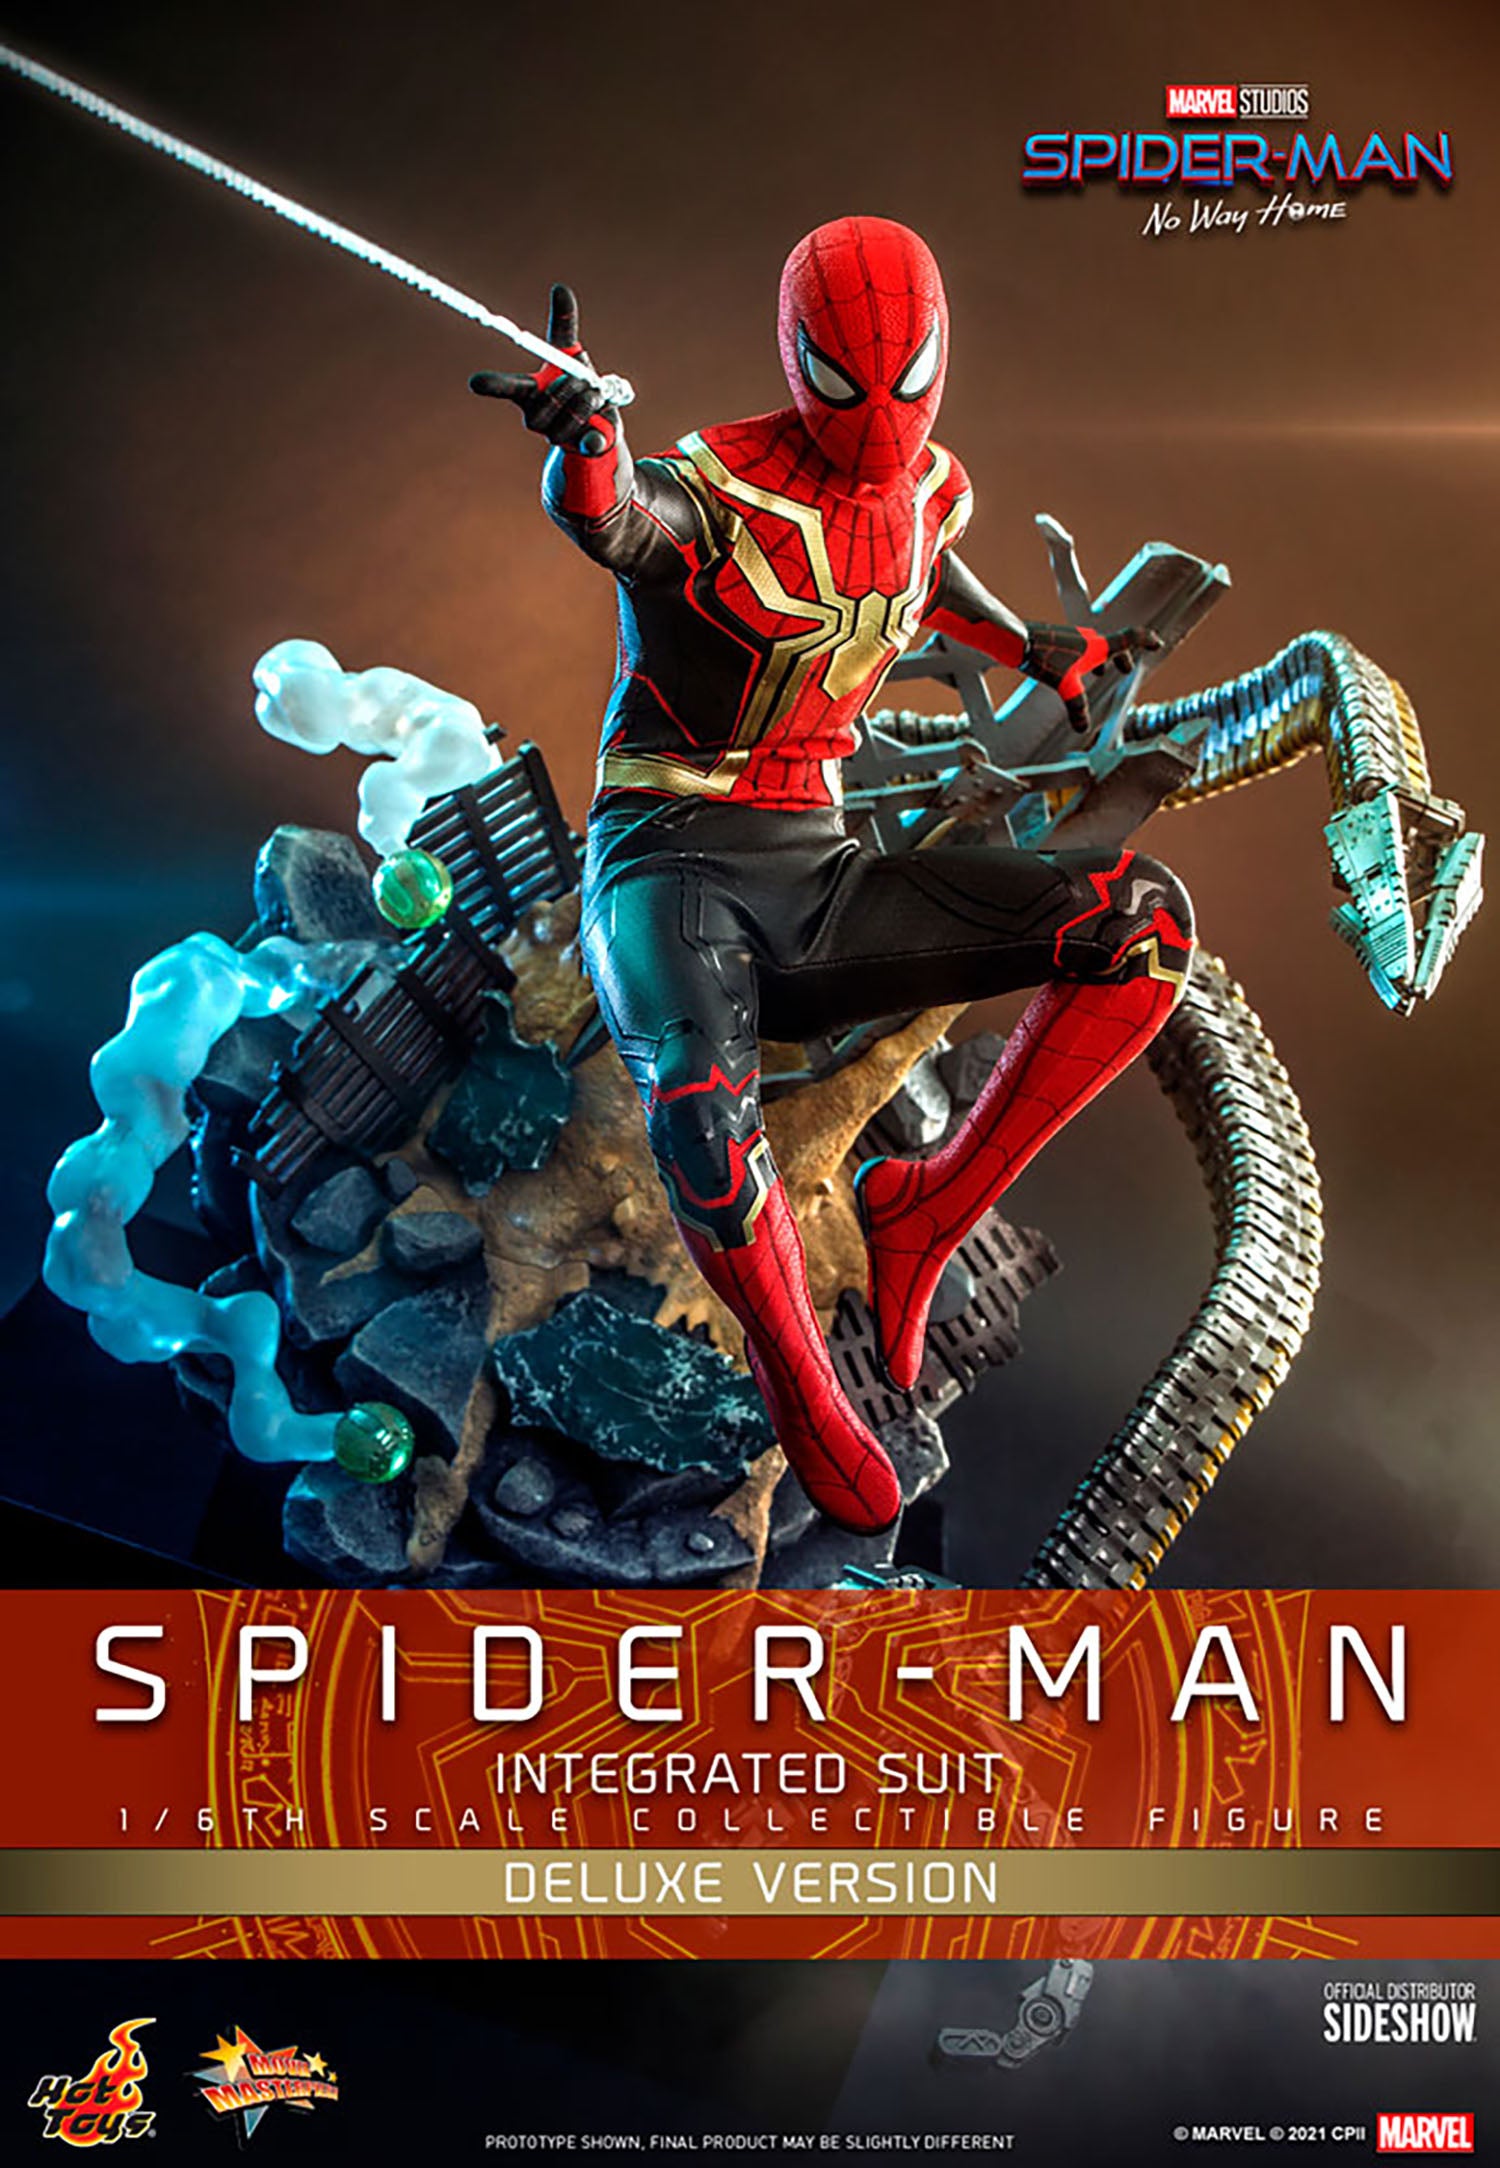 Hot Toys - Spider-Man (Integrated Suit) Deluxe Version Sixth Scale